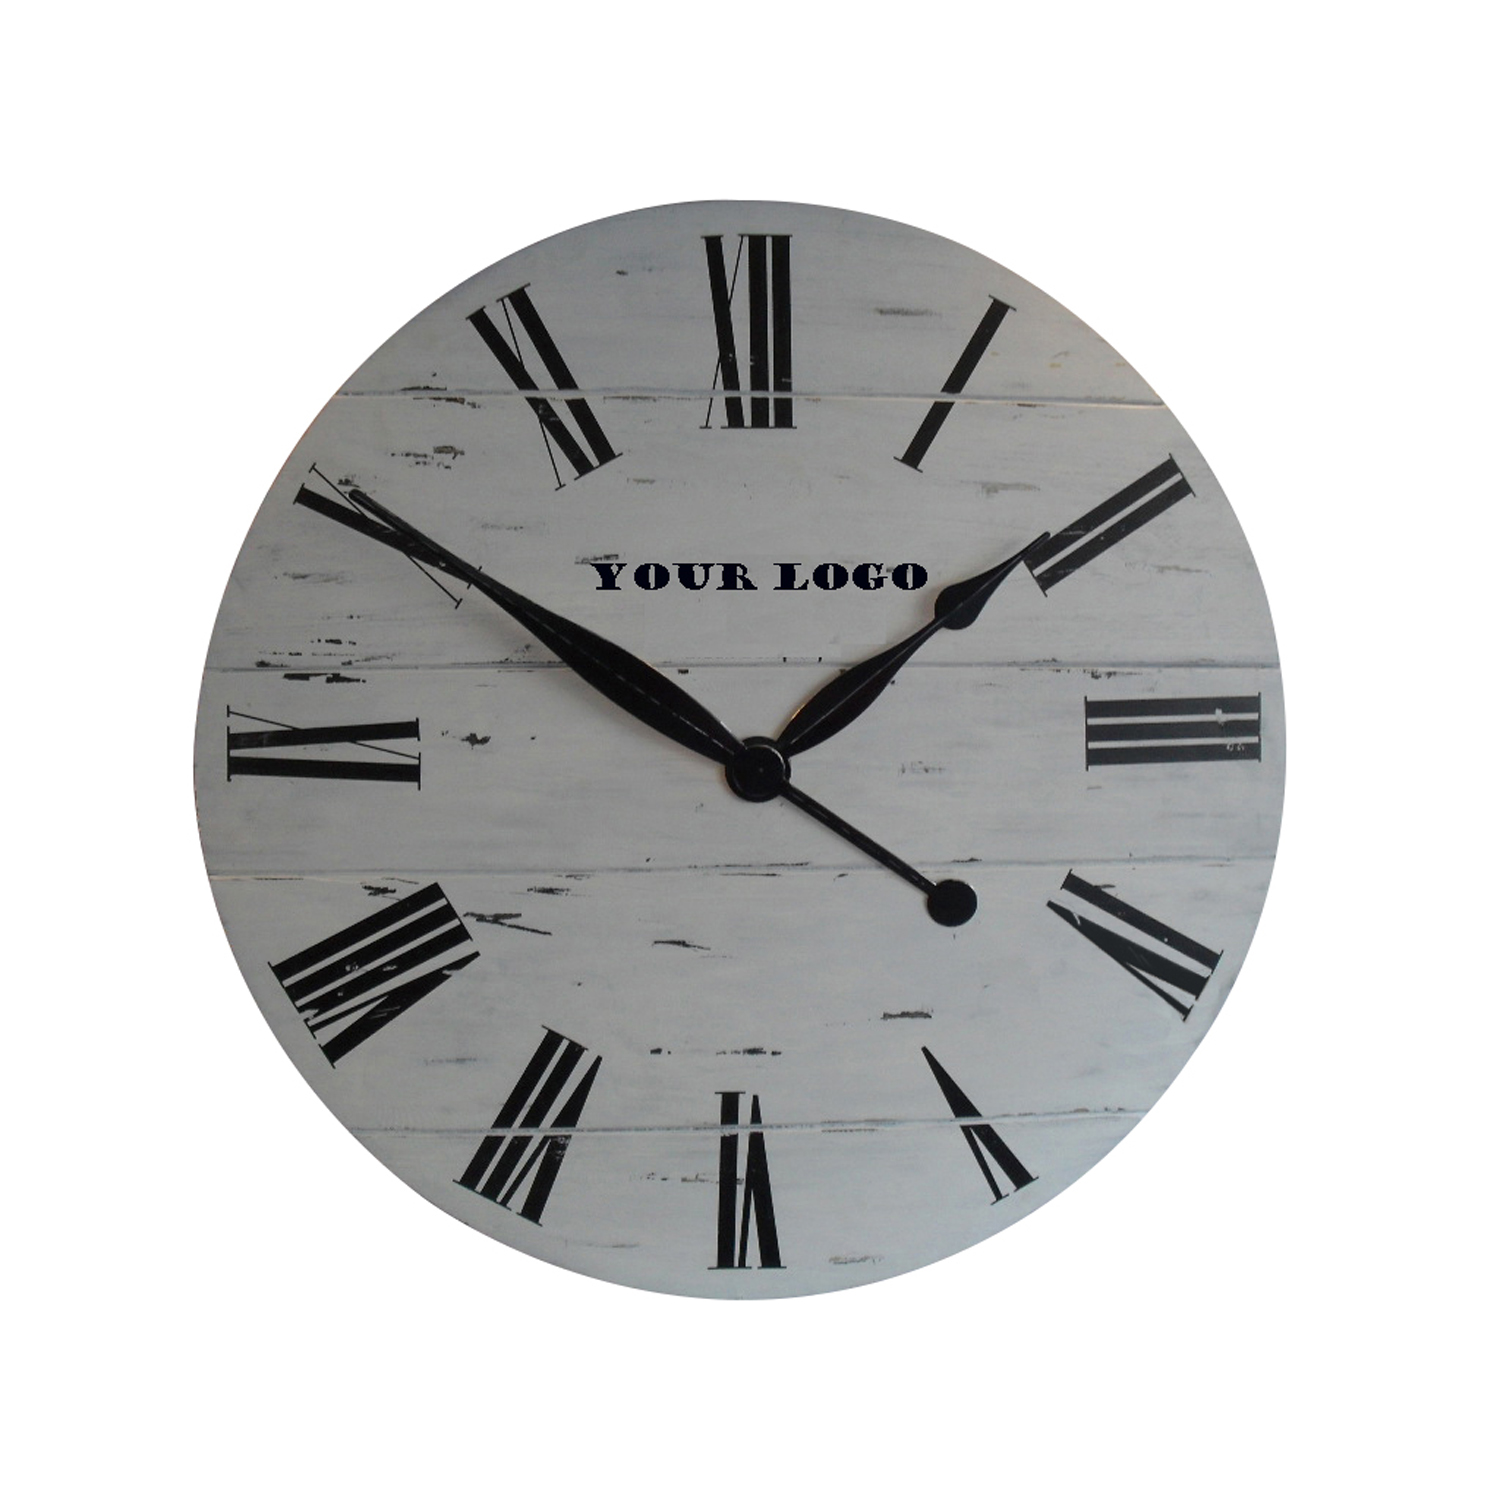 OEM brand 36 inches solid wood wall clock